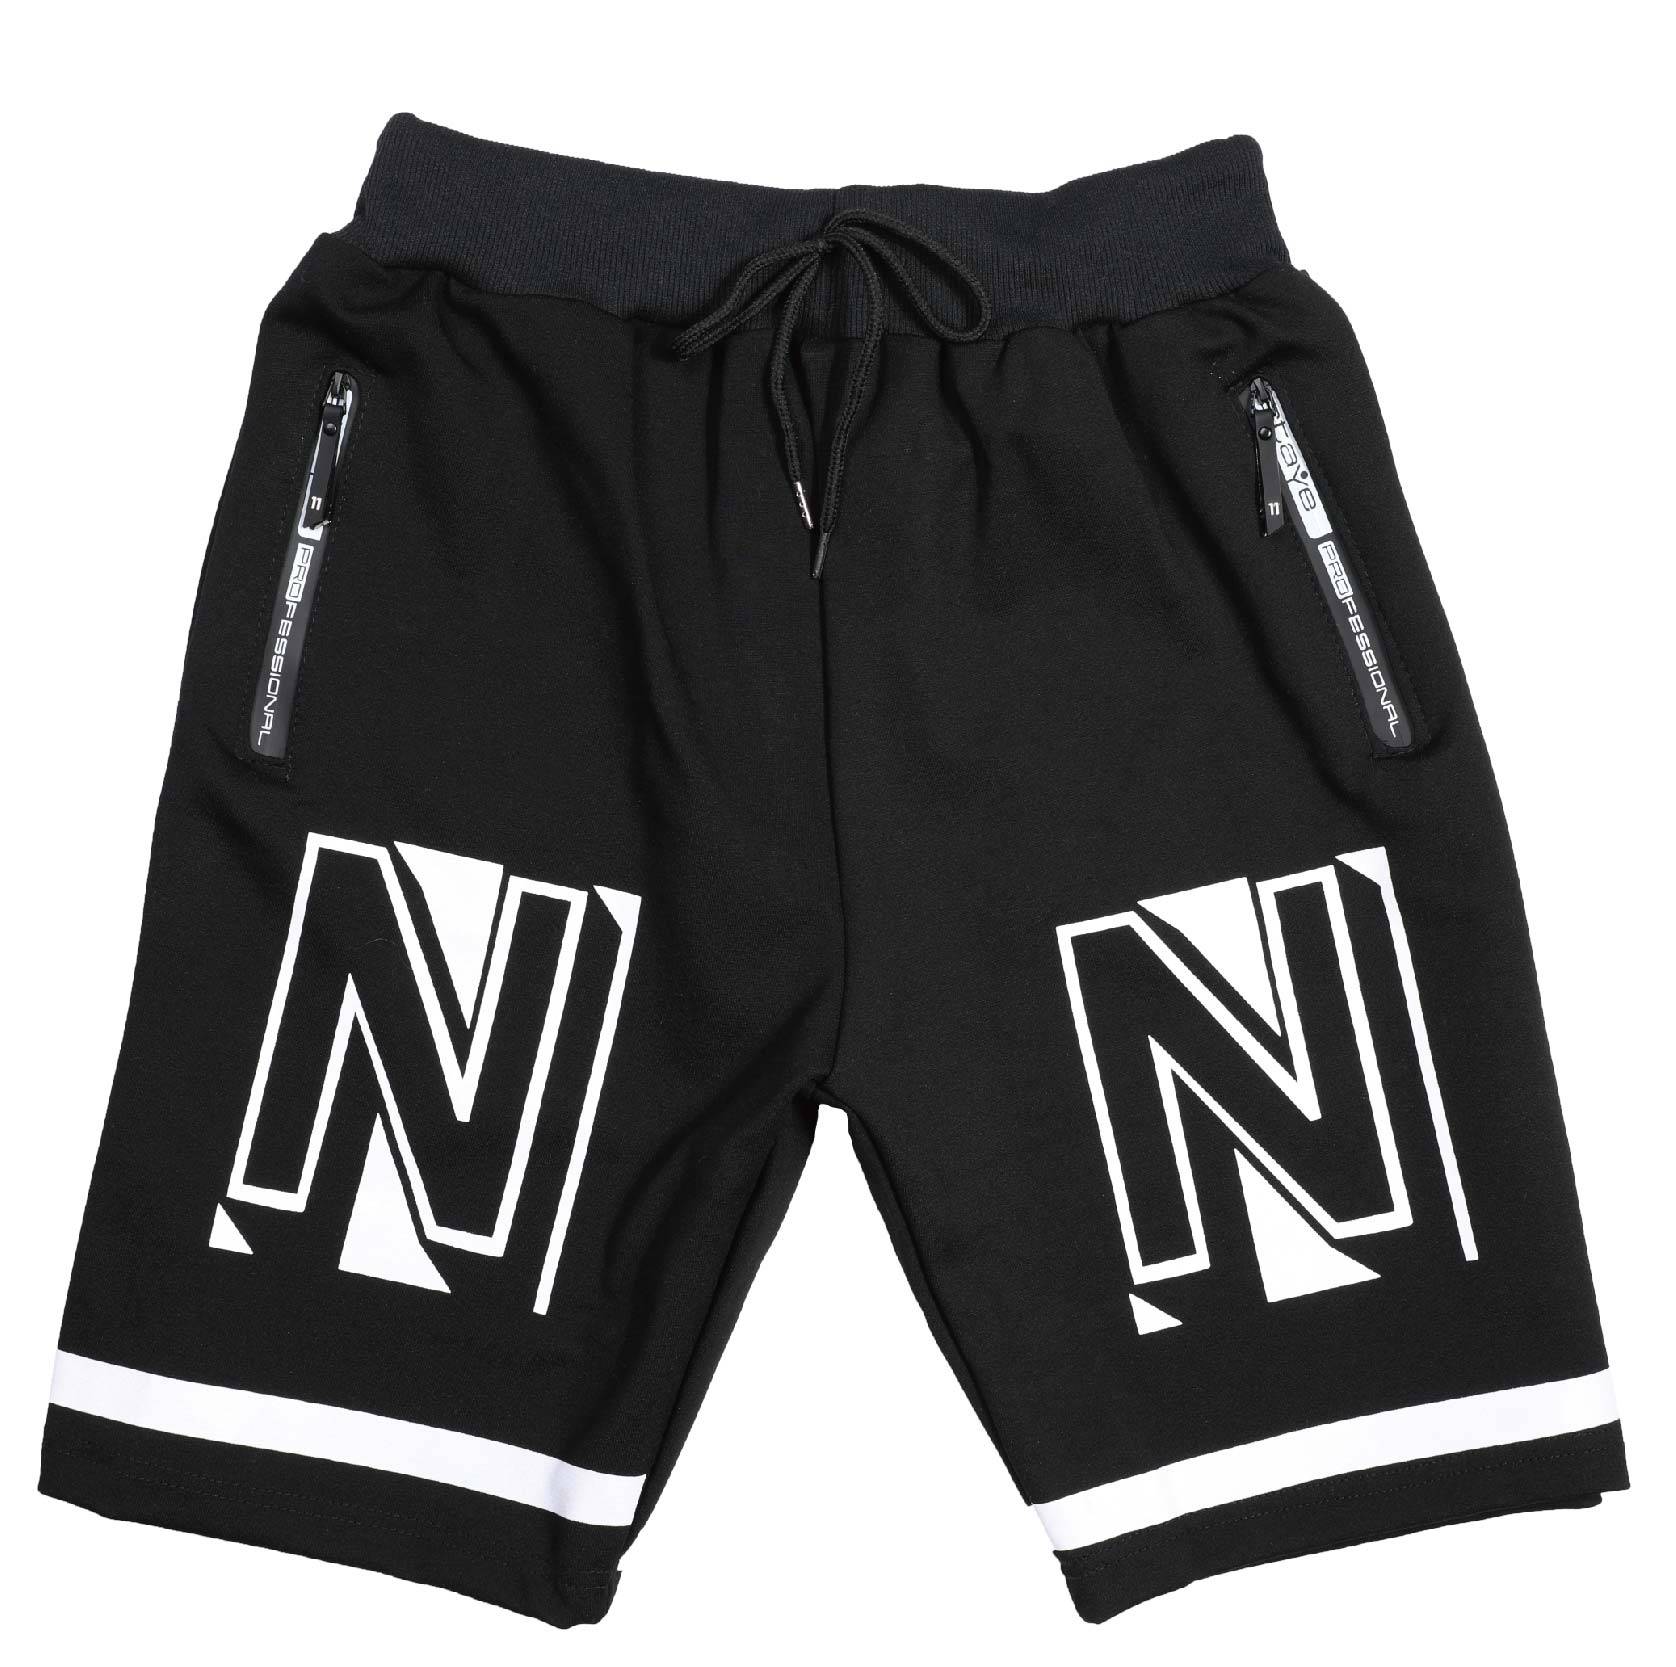 2019 Good Quality Wholesale Hoodies - Ngozi Men’s Outdoor Lightweight Quick Dry Hiking Shorts/ Sports Casual Shorts – Fullerton